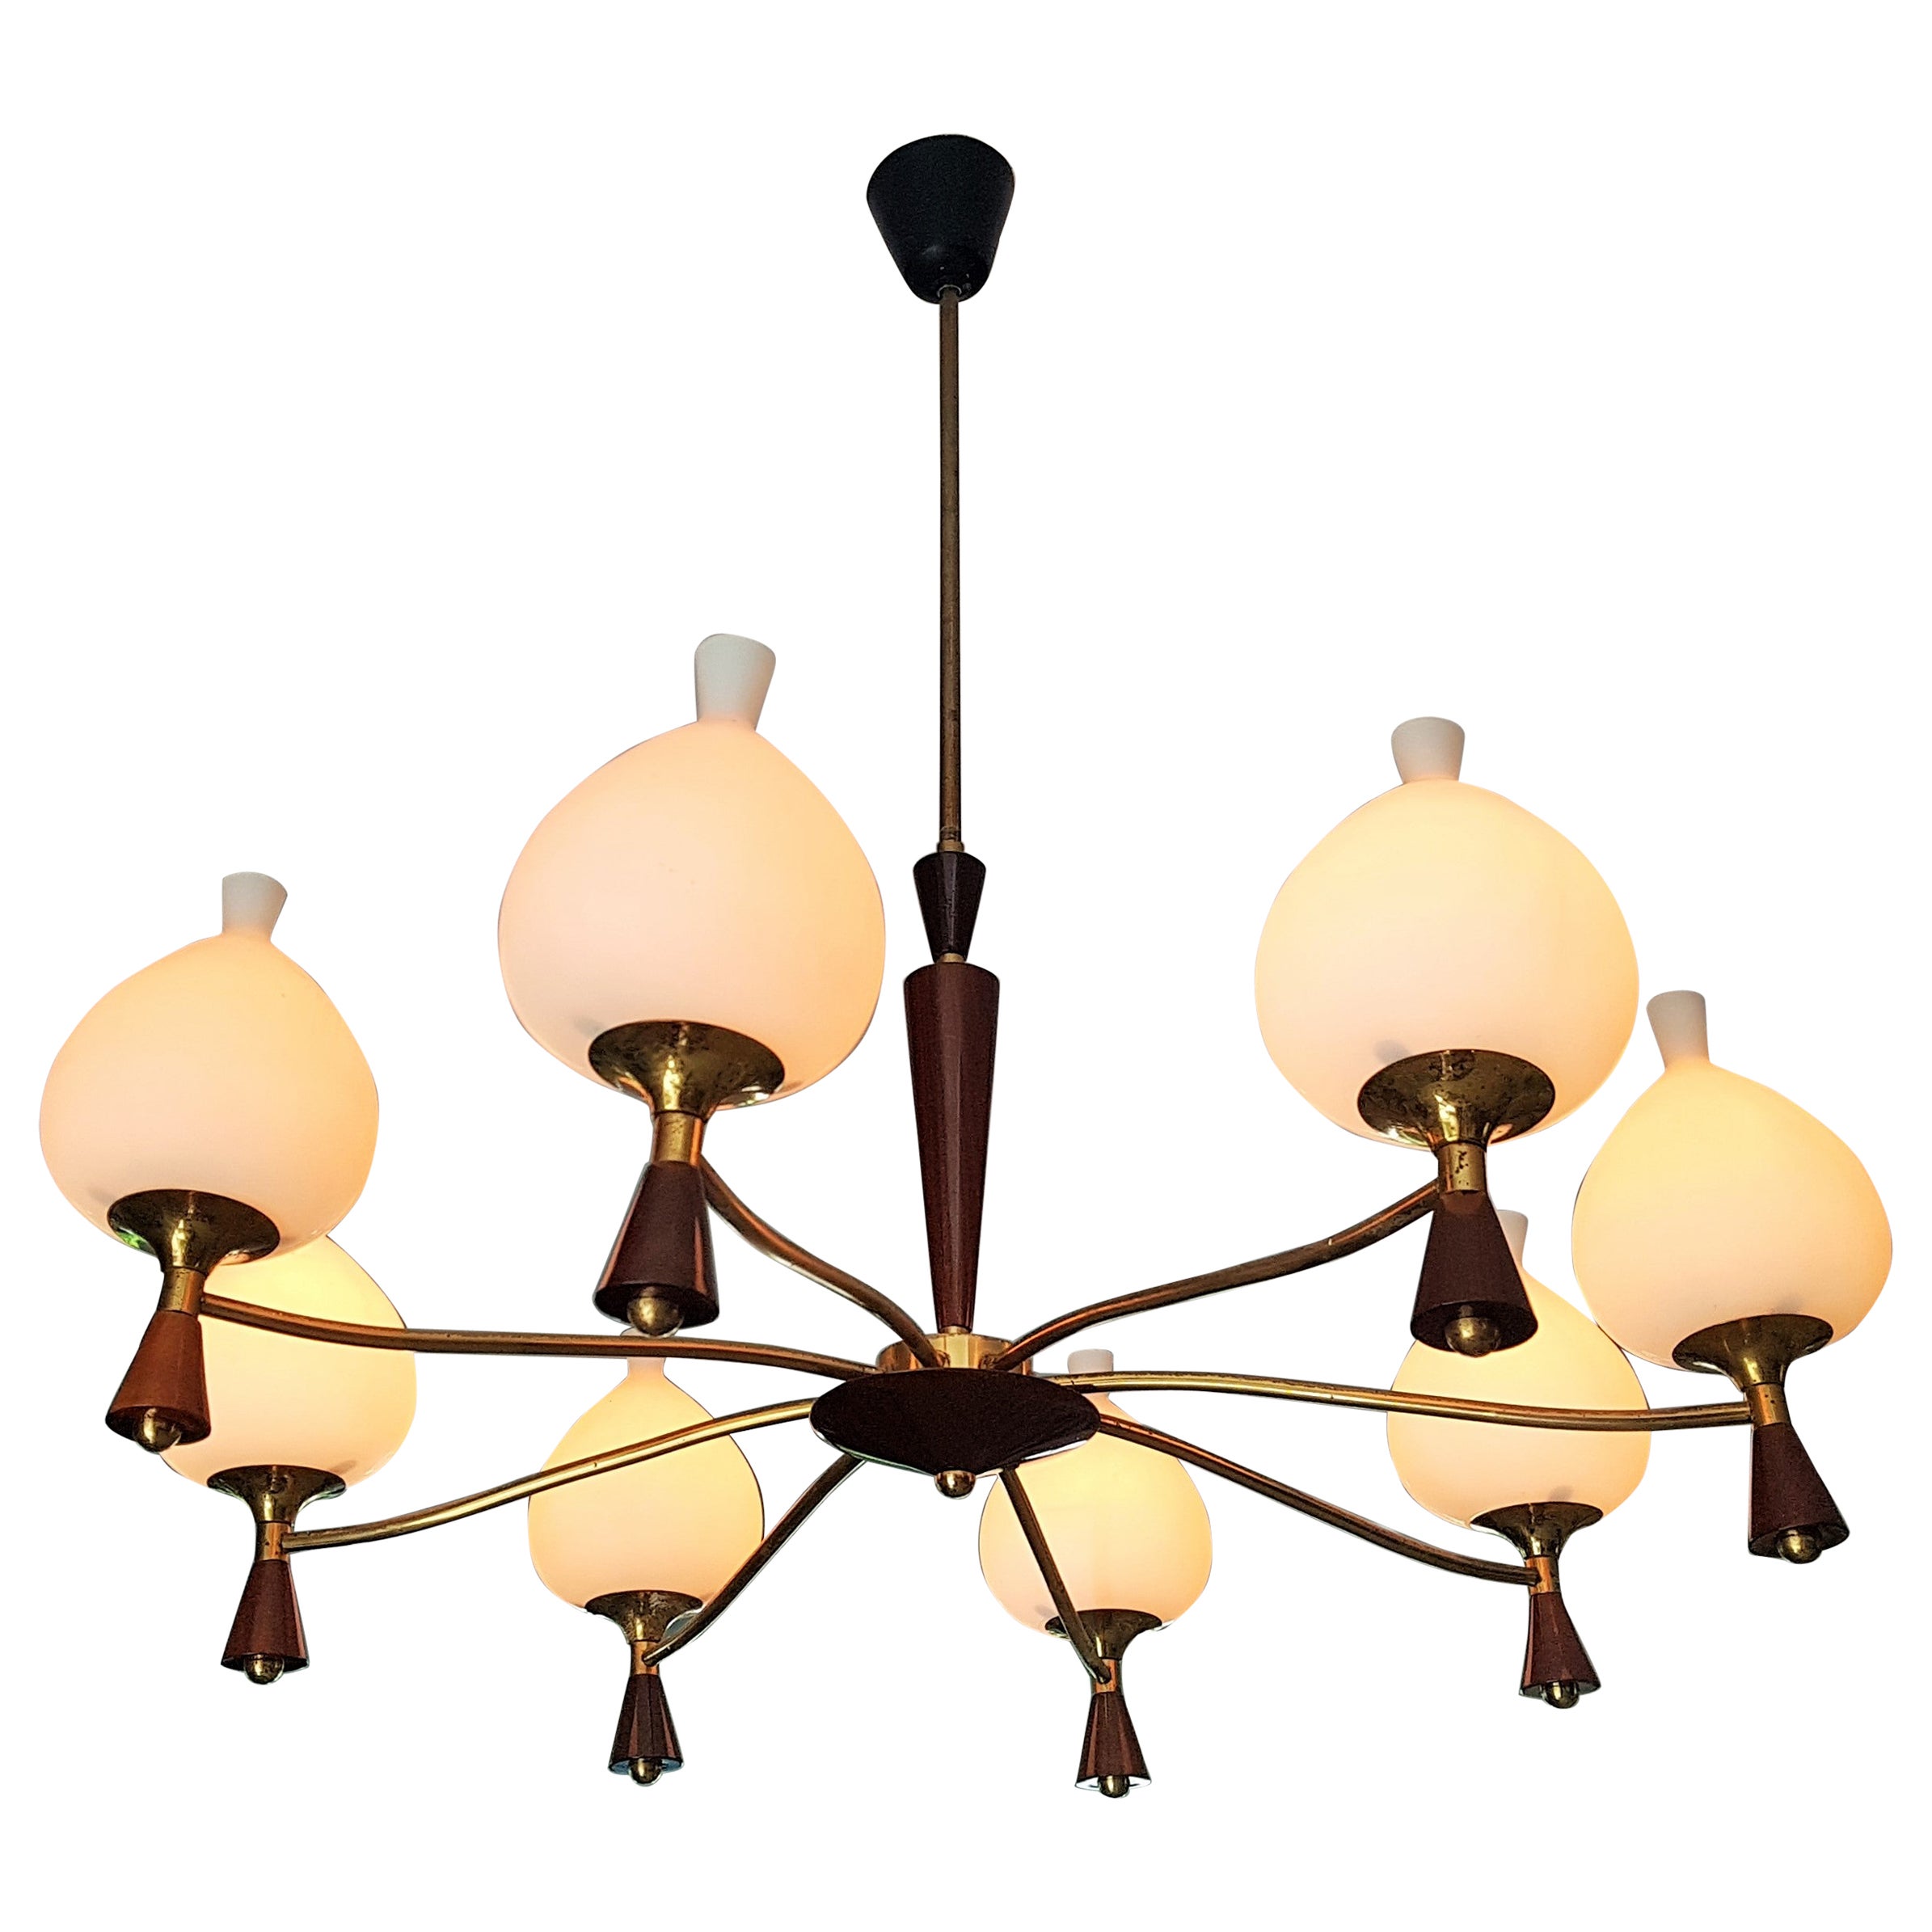 Midcentury Chandelier Style Sciolari, Brass and Wood, Italy, 1950s For Sale